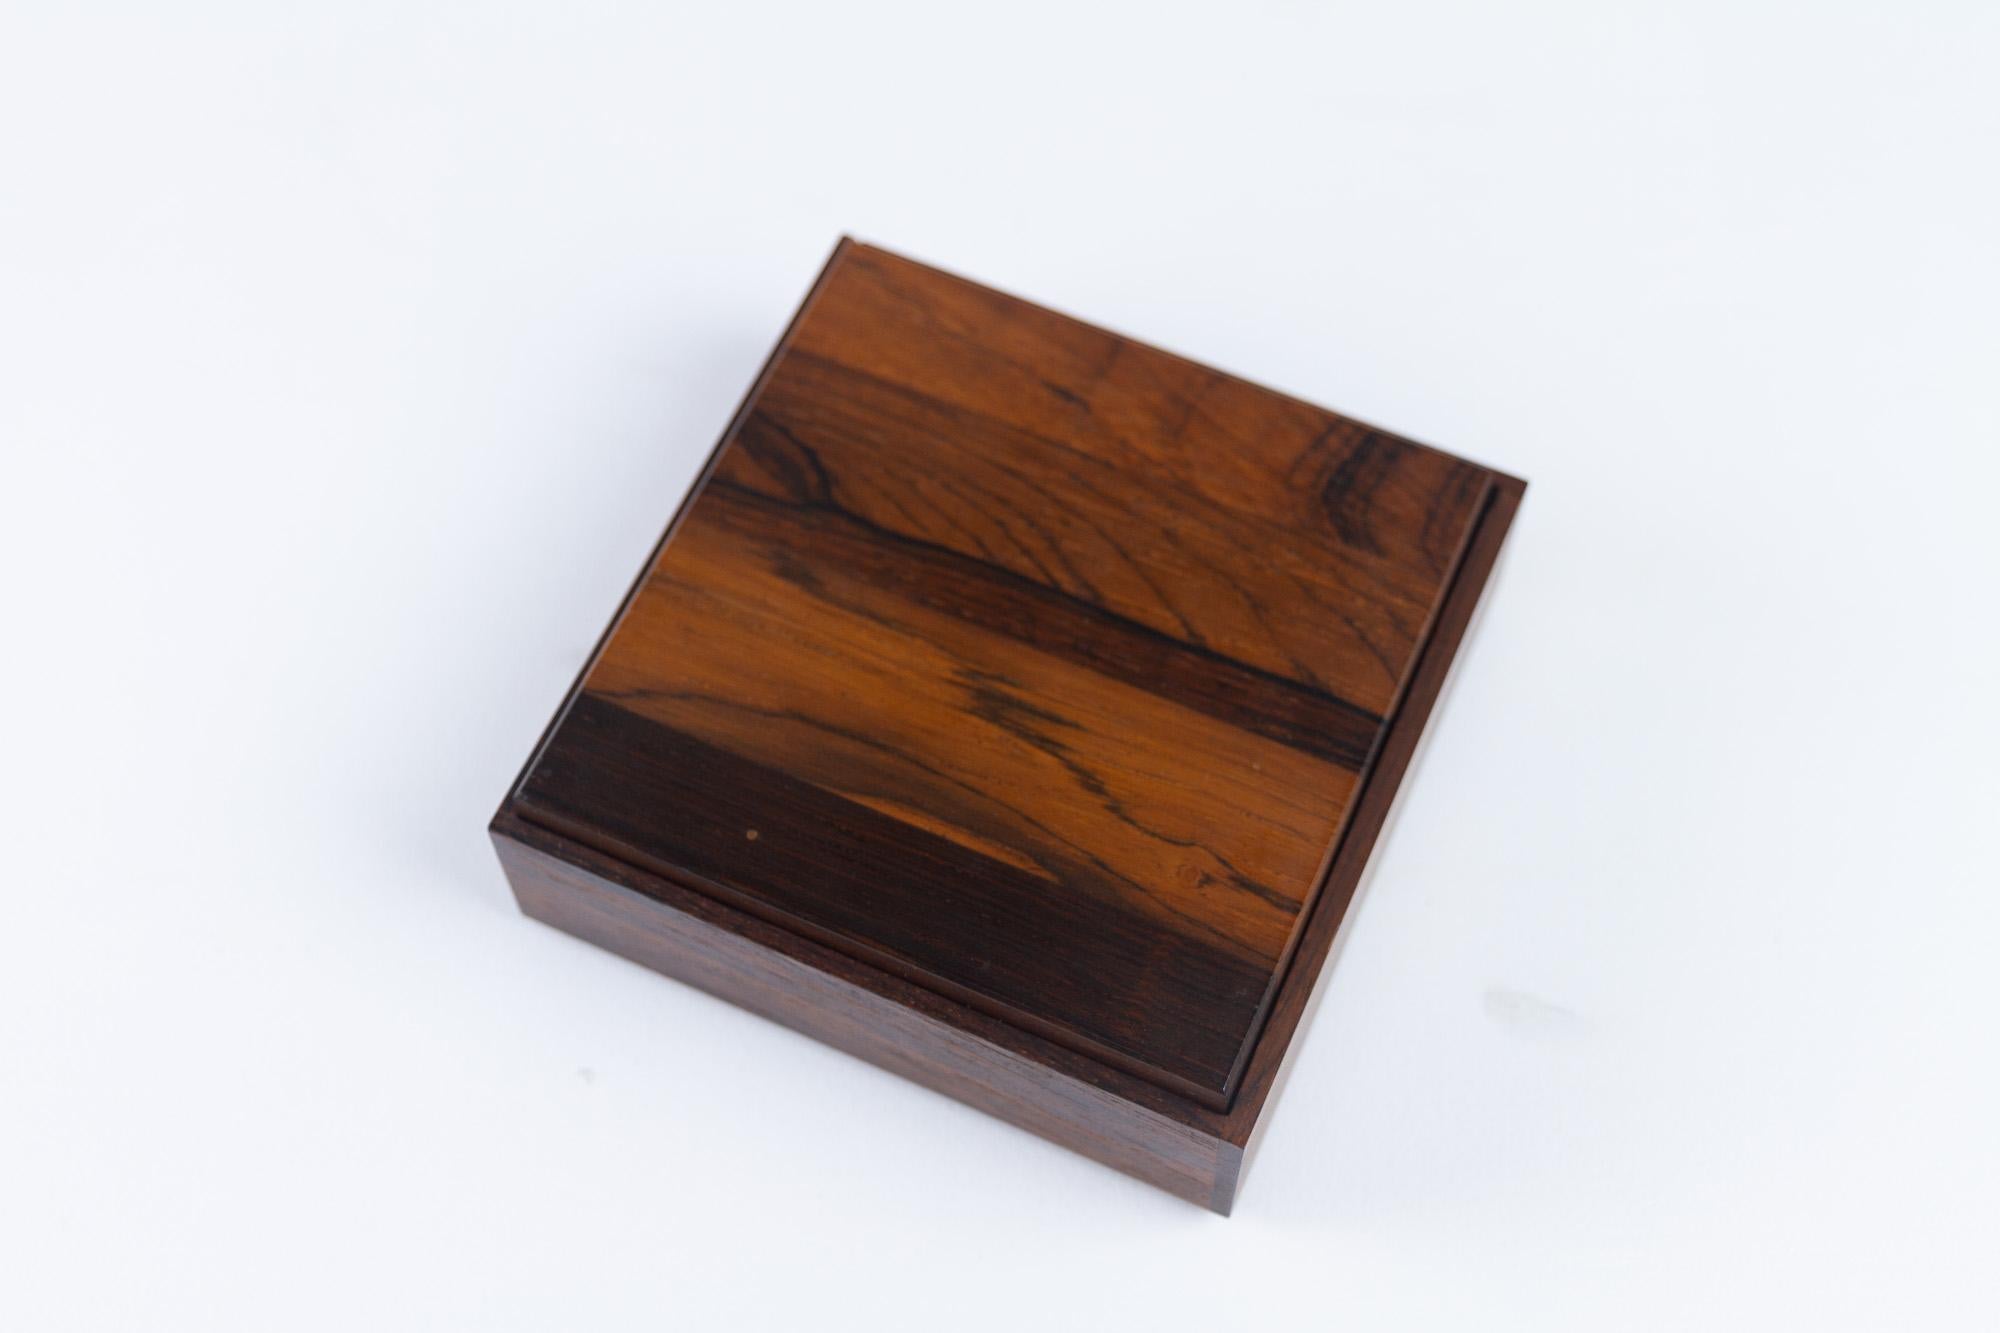 Vintage Danish Rosewood Box, 1960s.
Small decorative box with lid in solid rosewood and black Formica. Beautiful rosewood grain and color. 
Probably originally used for cigarettes or jewellery. 
Very good vintage condition. Minimal traces of use.